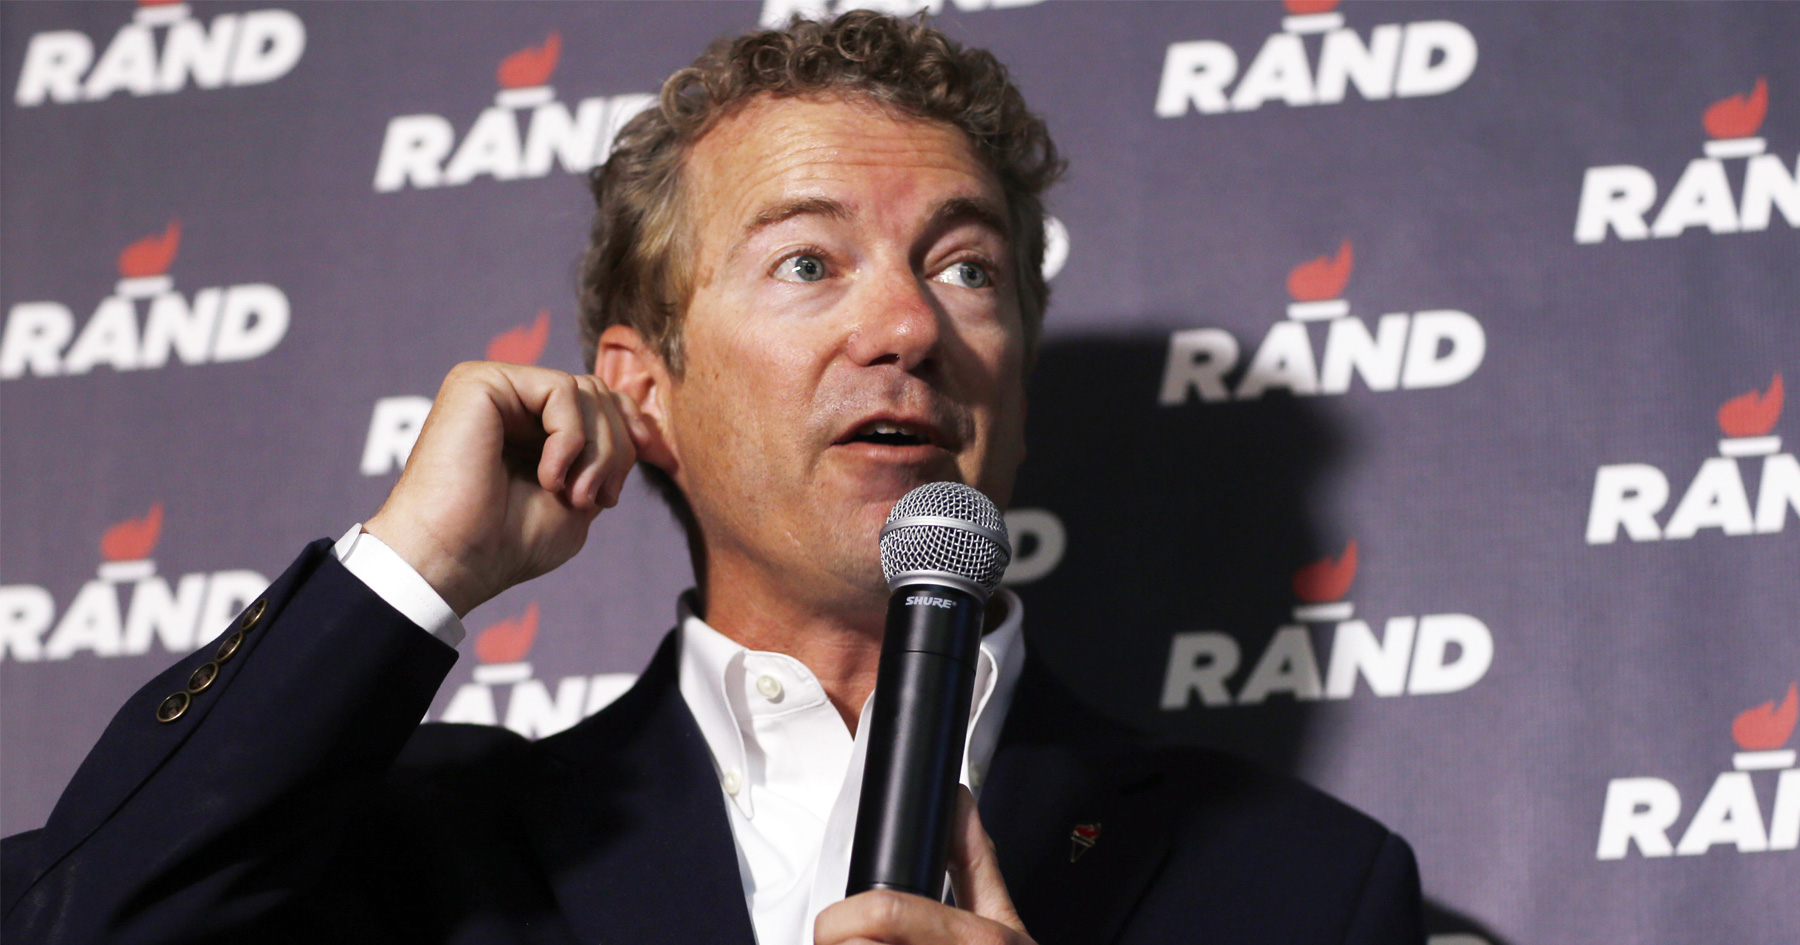 Rand Paul at a fundraiser in Colorado